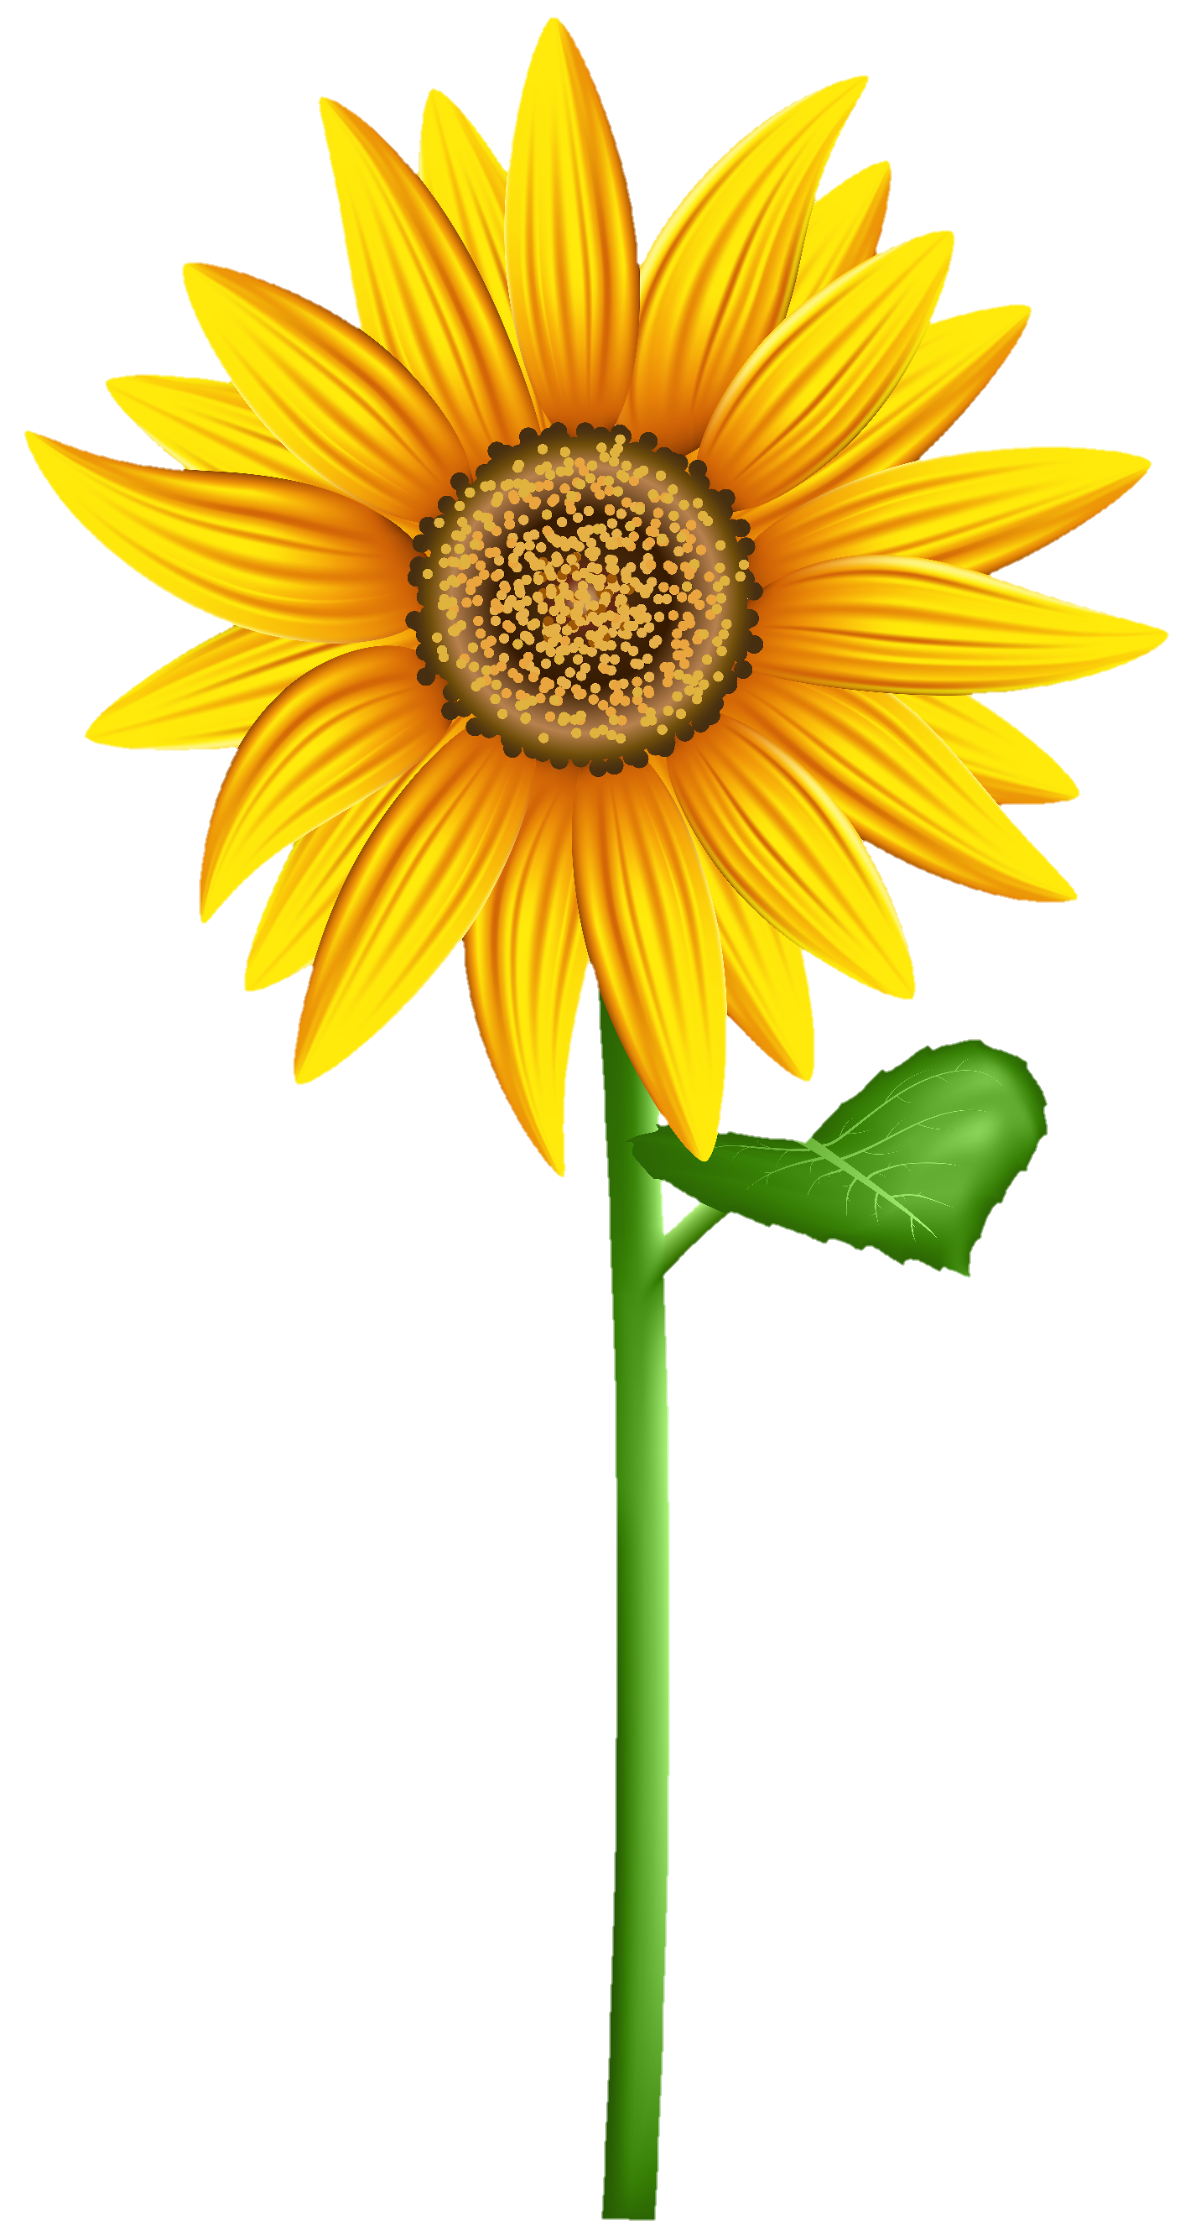 sunflower-png-image-from-pngfre-4